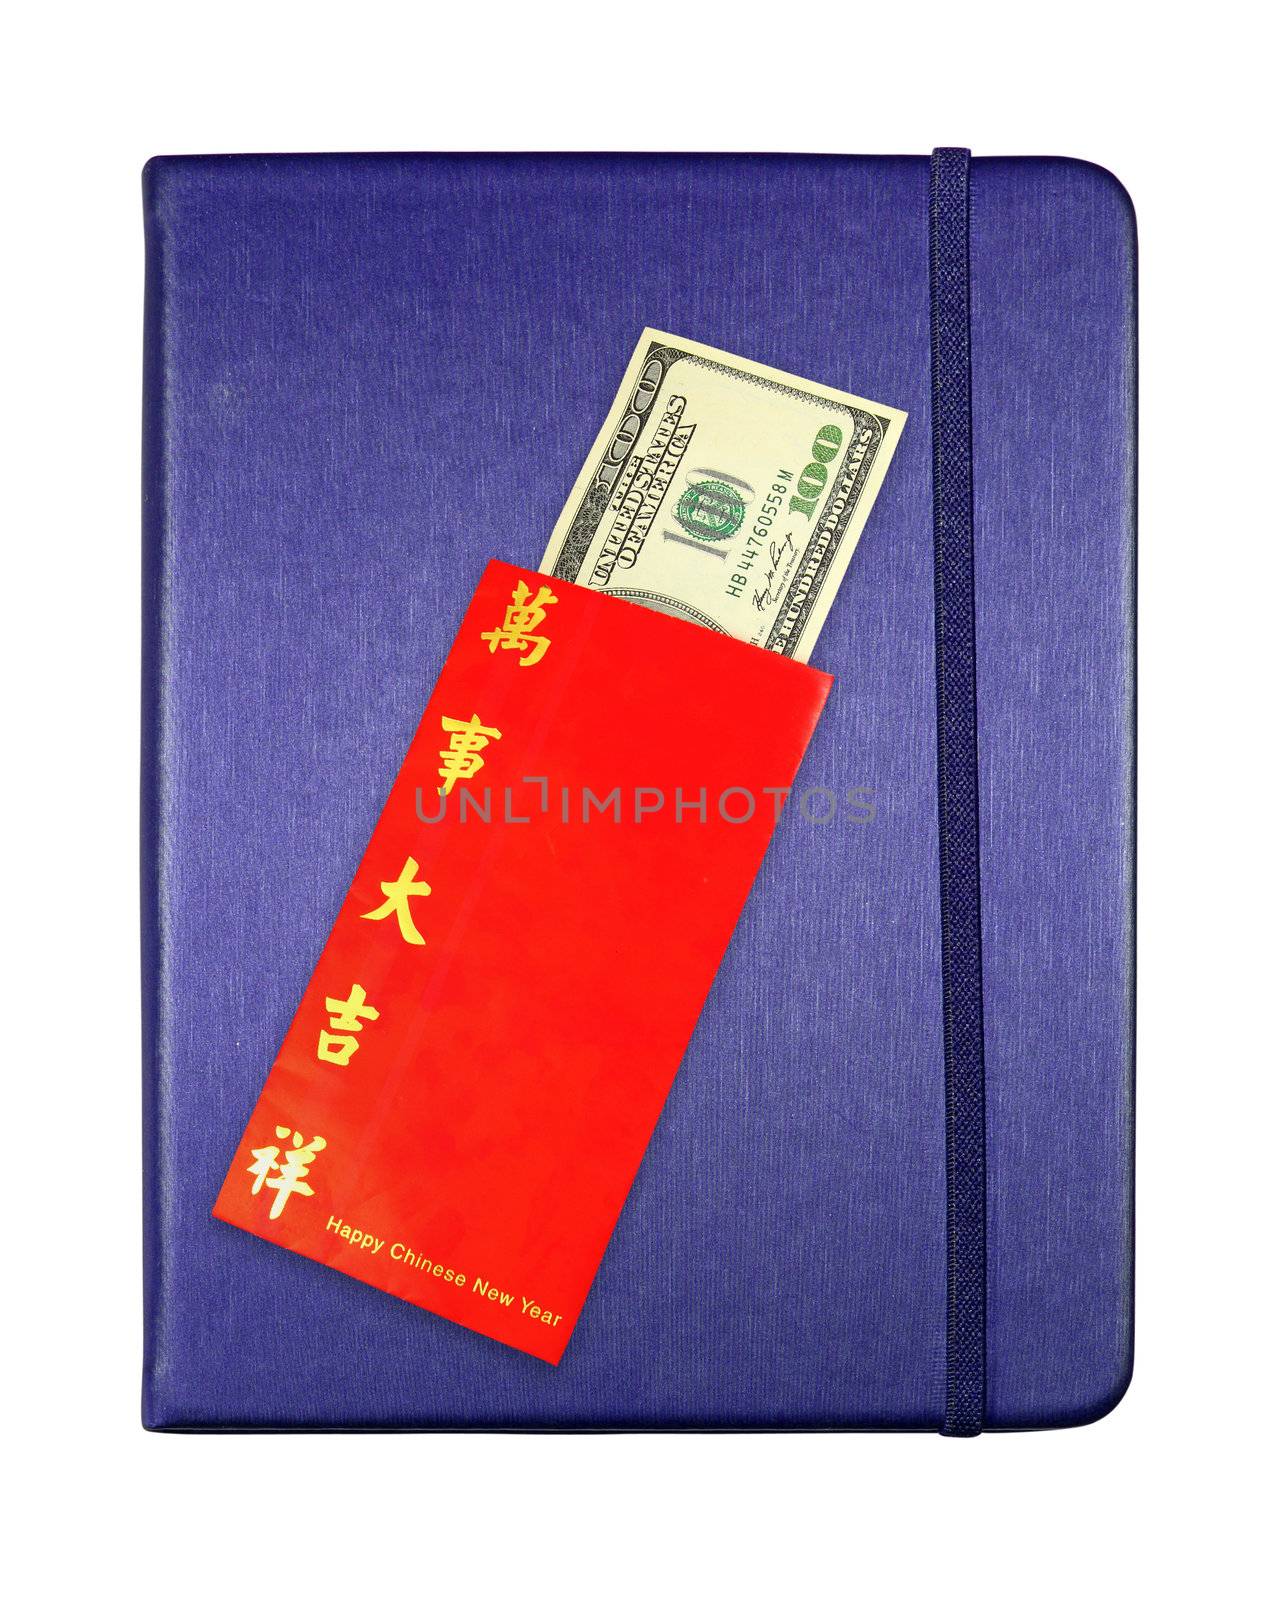 Money dollar cash banknote in red envelope on blue notebook isol by nuchylee